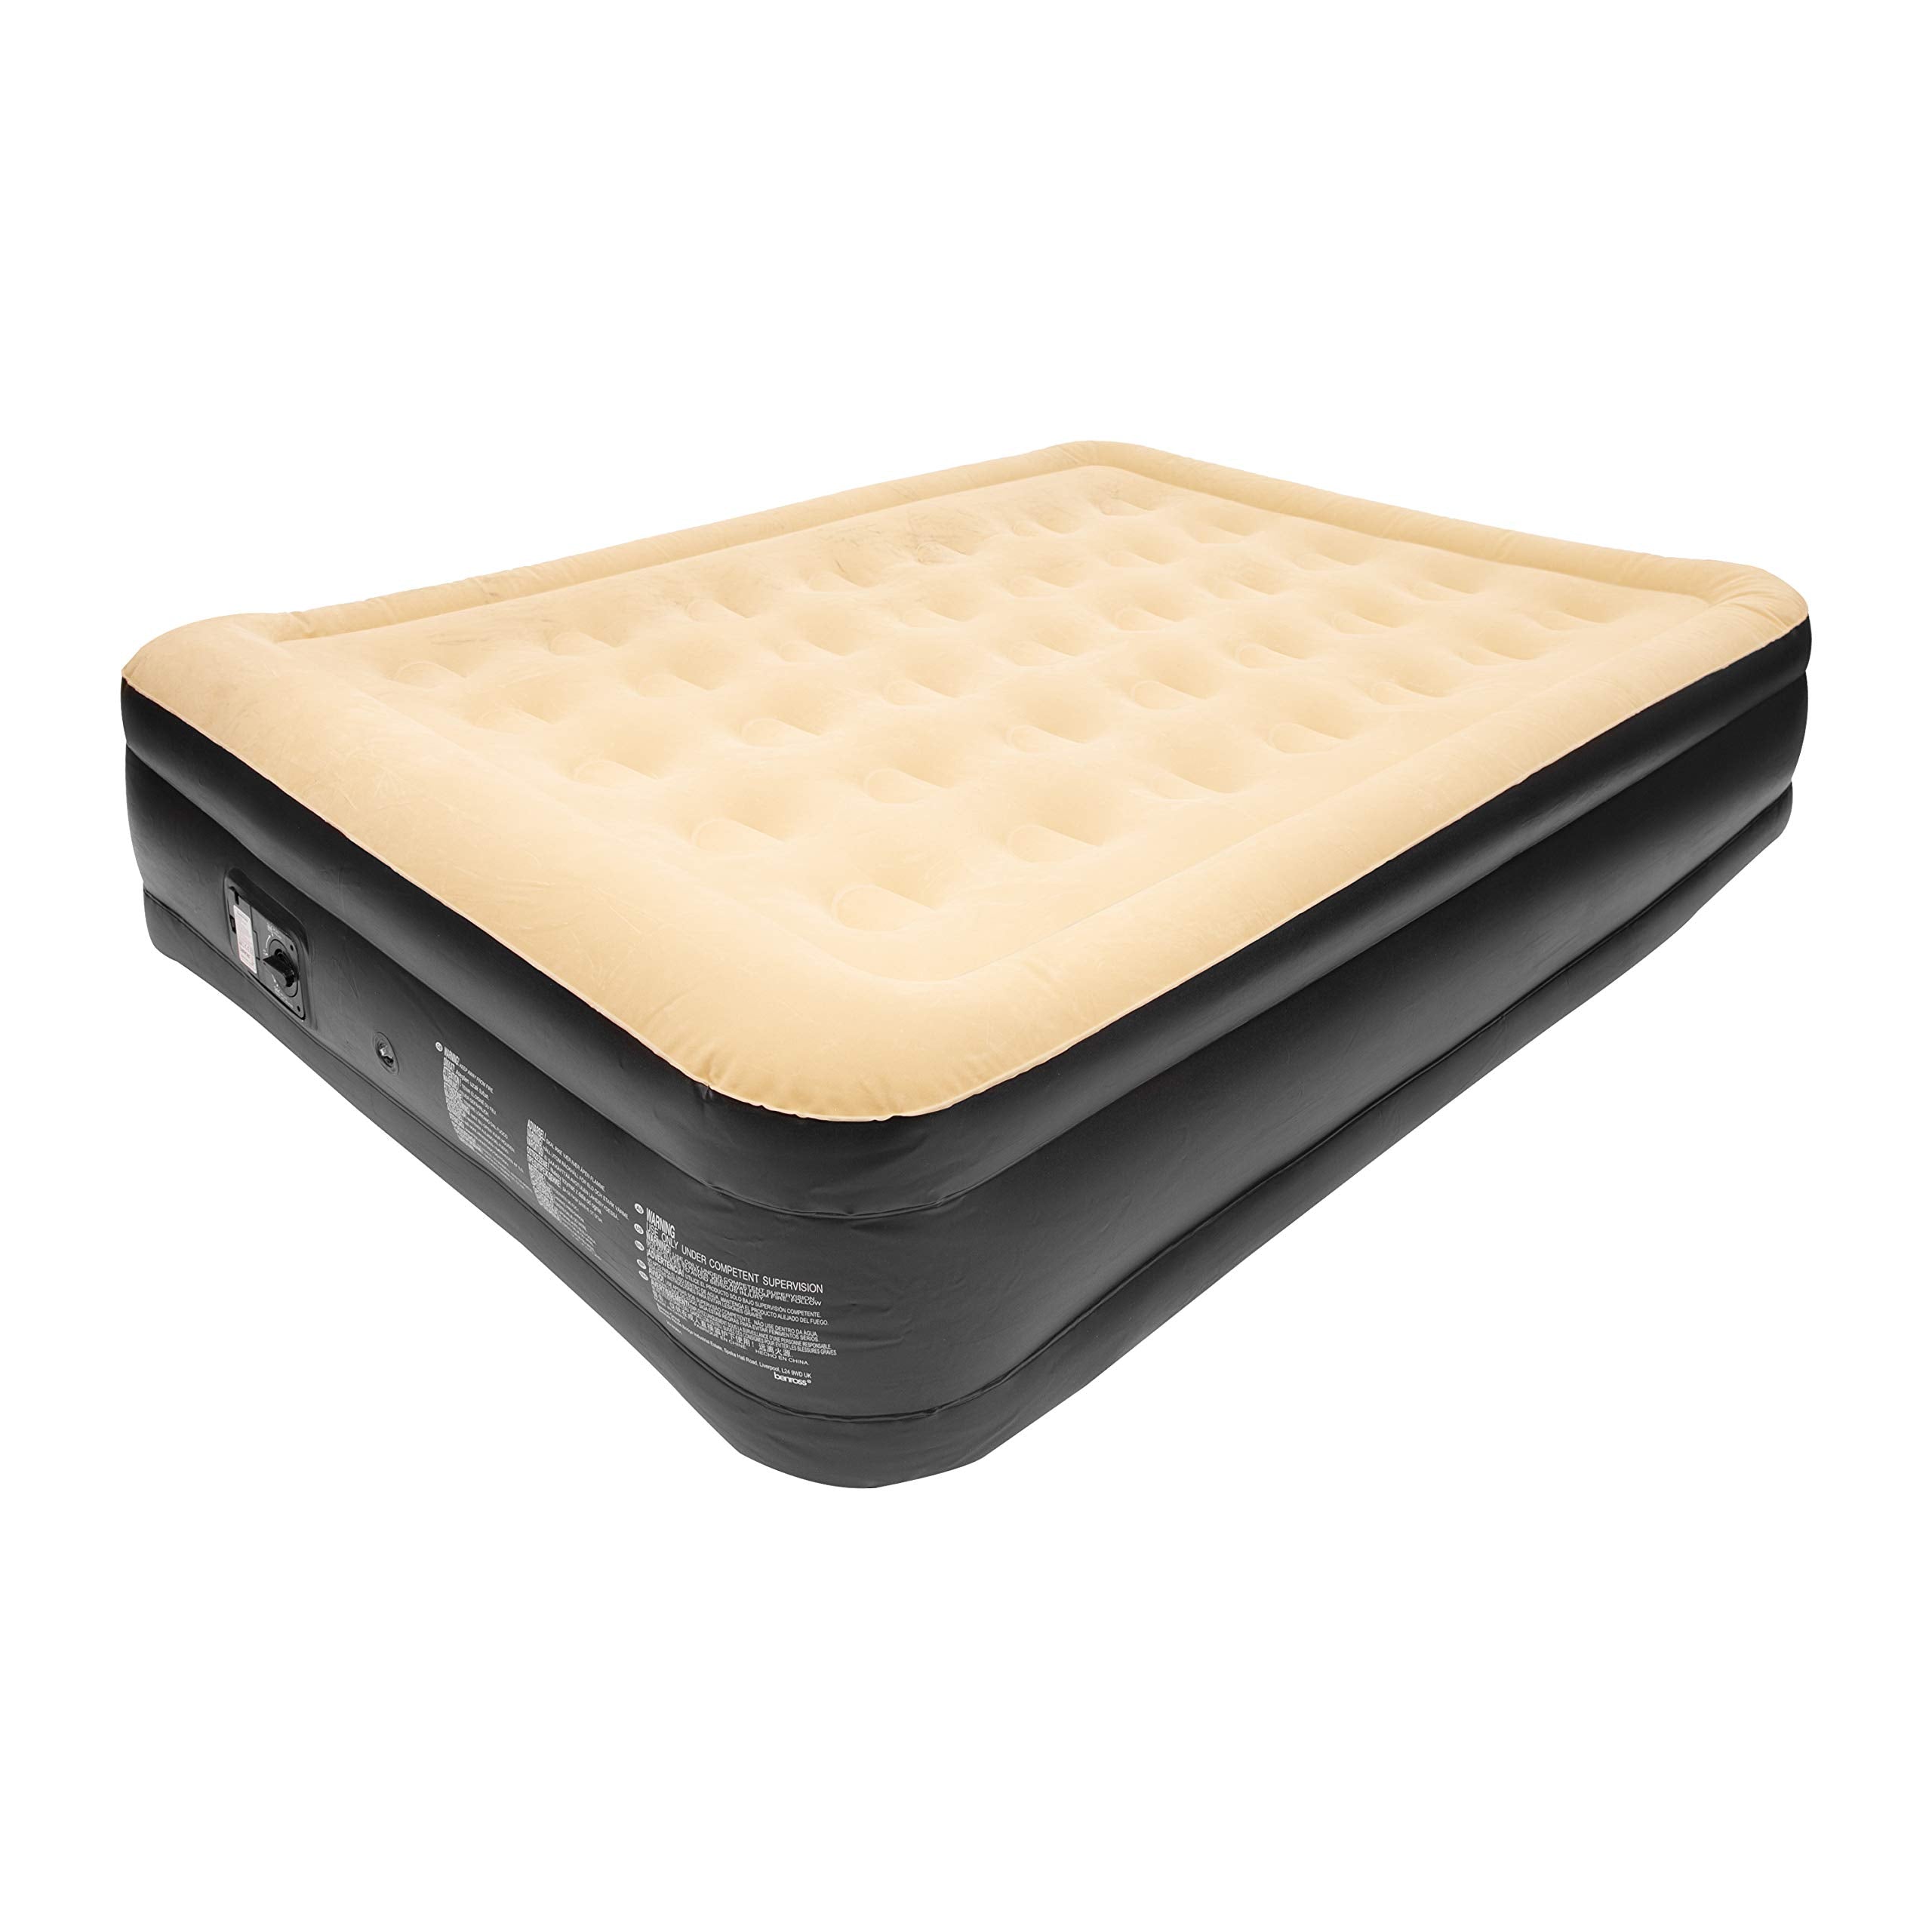 Avenli 88030 High Raised Flocked Airbed | Queen Size | Built In Pumps | Quick & Easy Inflation